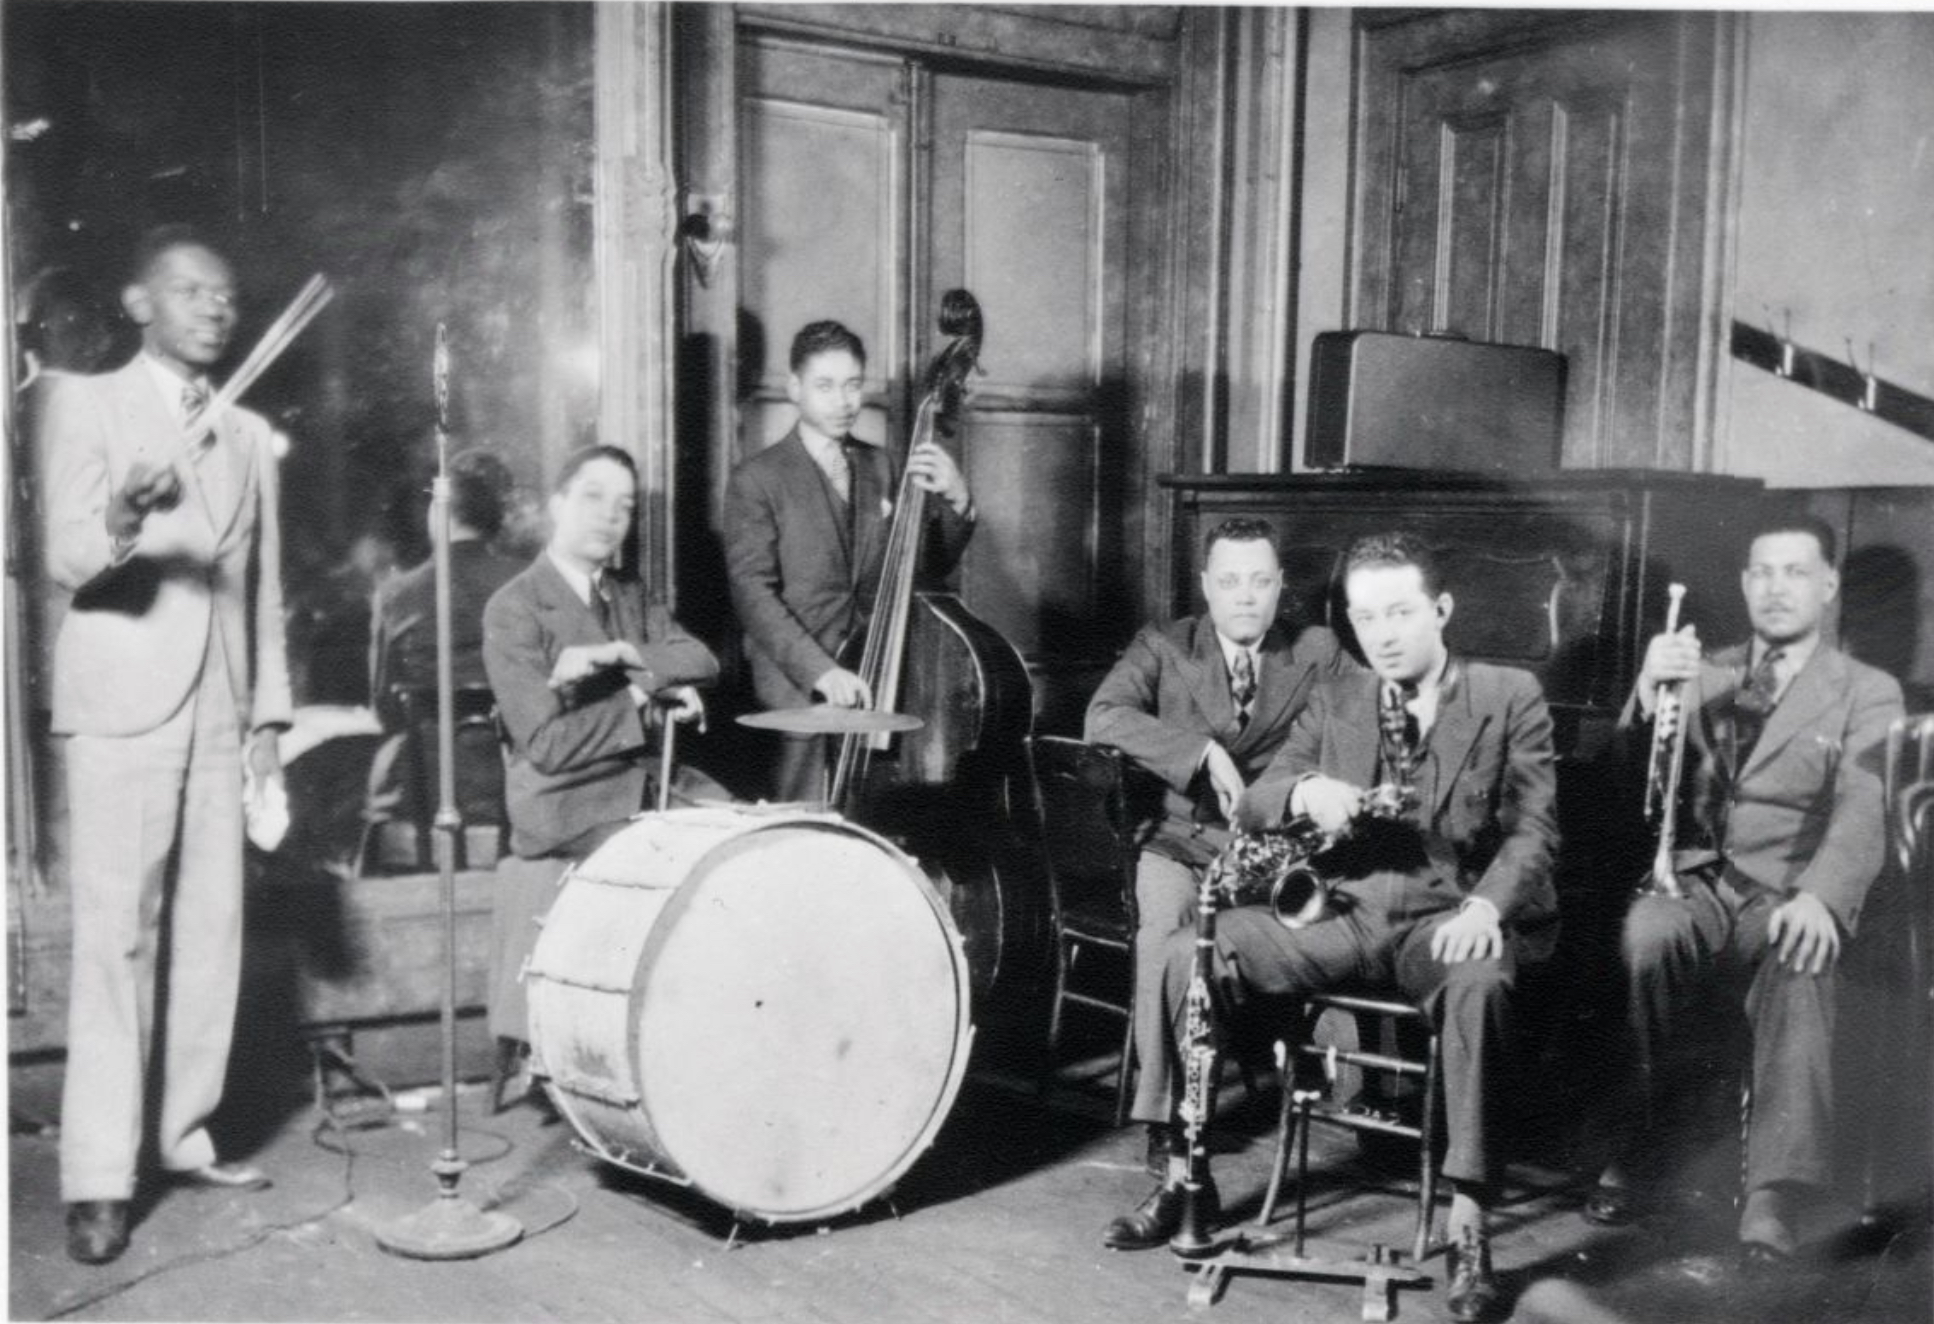 Wisdom Brothers Band at the Cotton Club, ca. 1950s